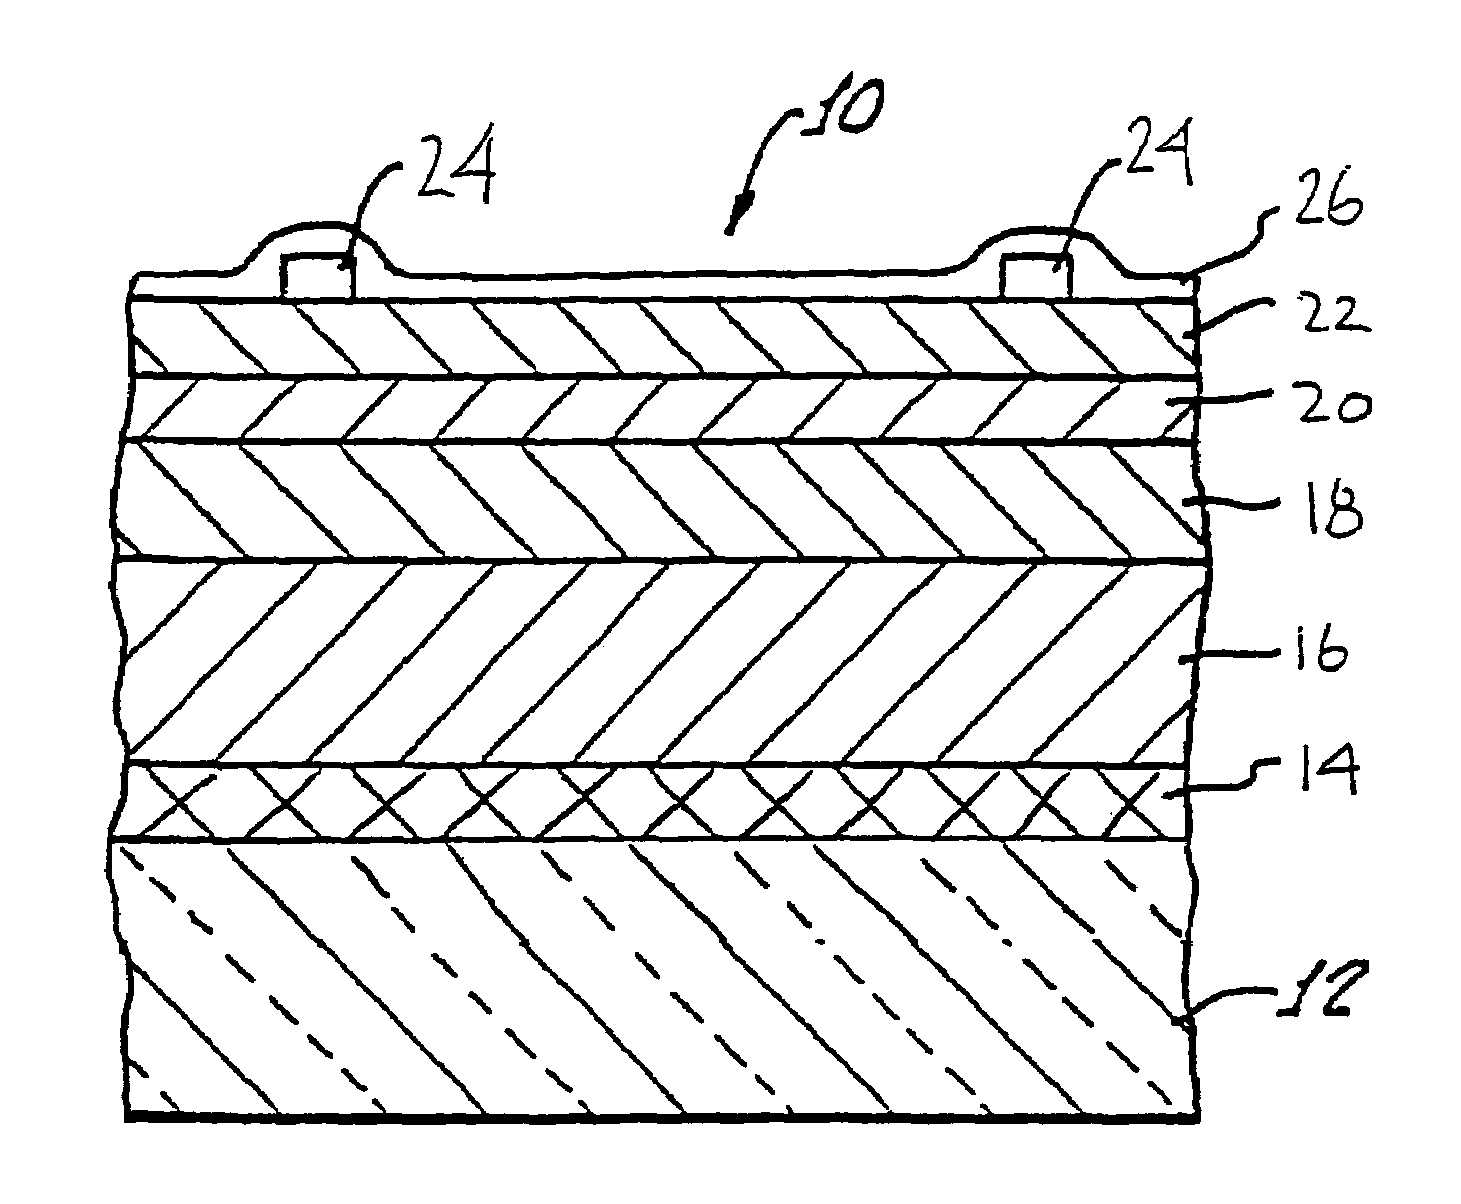 Preparation of CIGS-based solar cells using a buffered electrodeposition bath